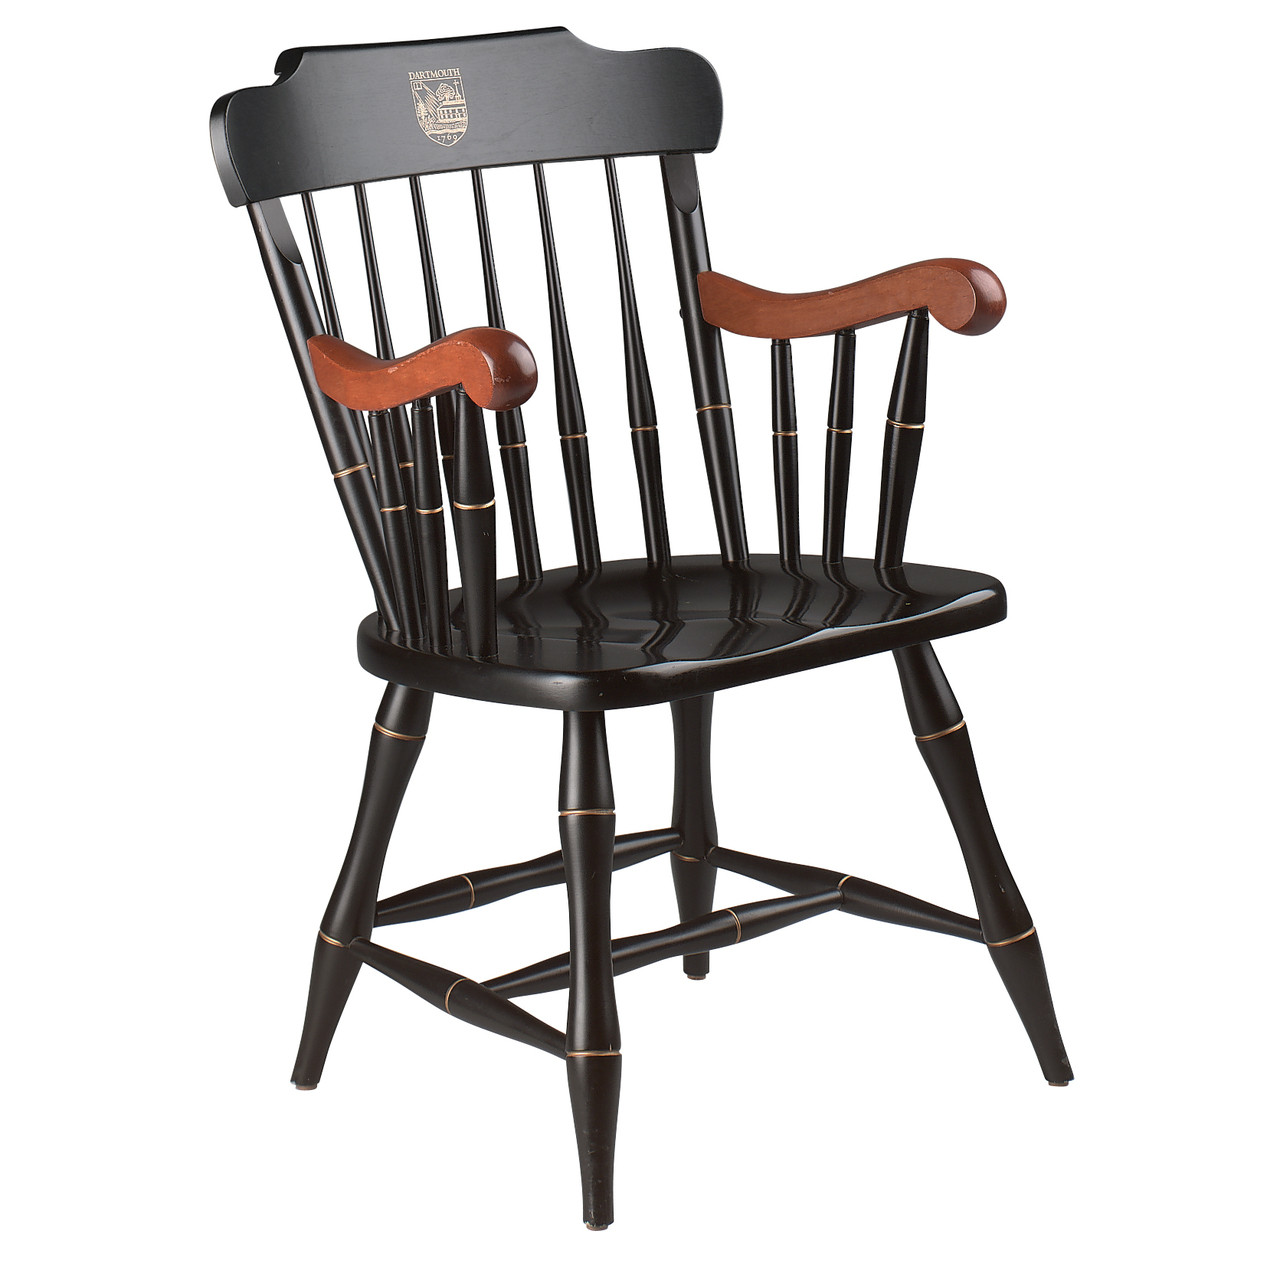 Dartmouth College Captain's Chair,Wooden Captain's Chair wit